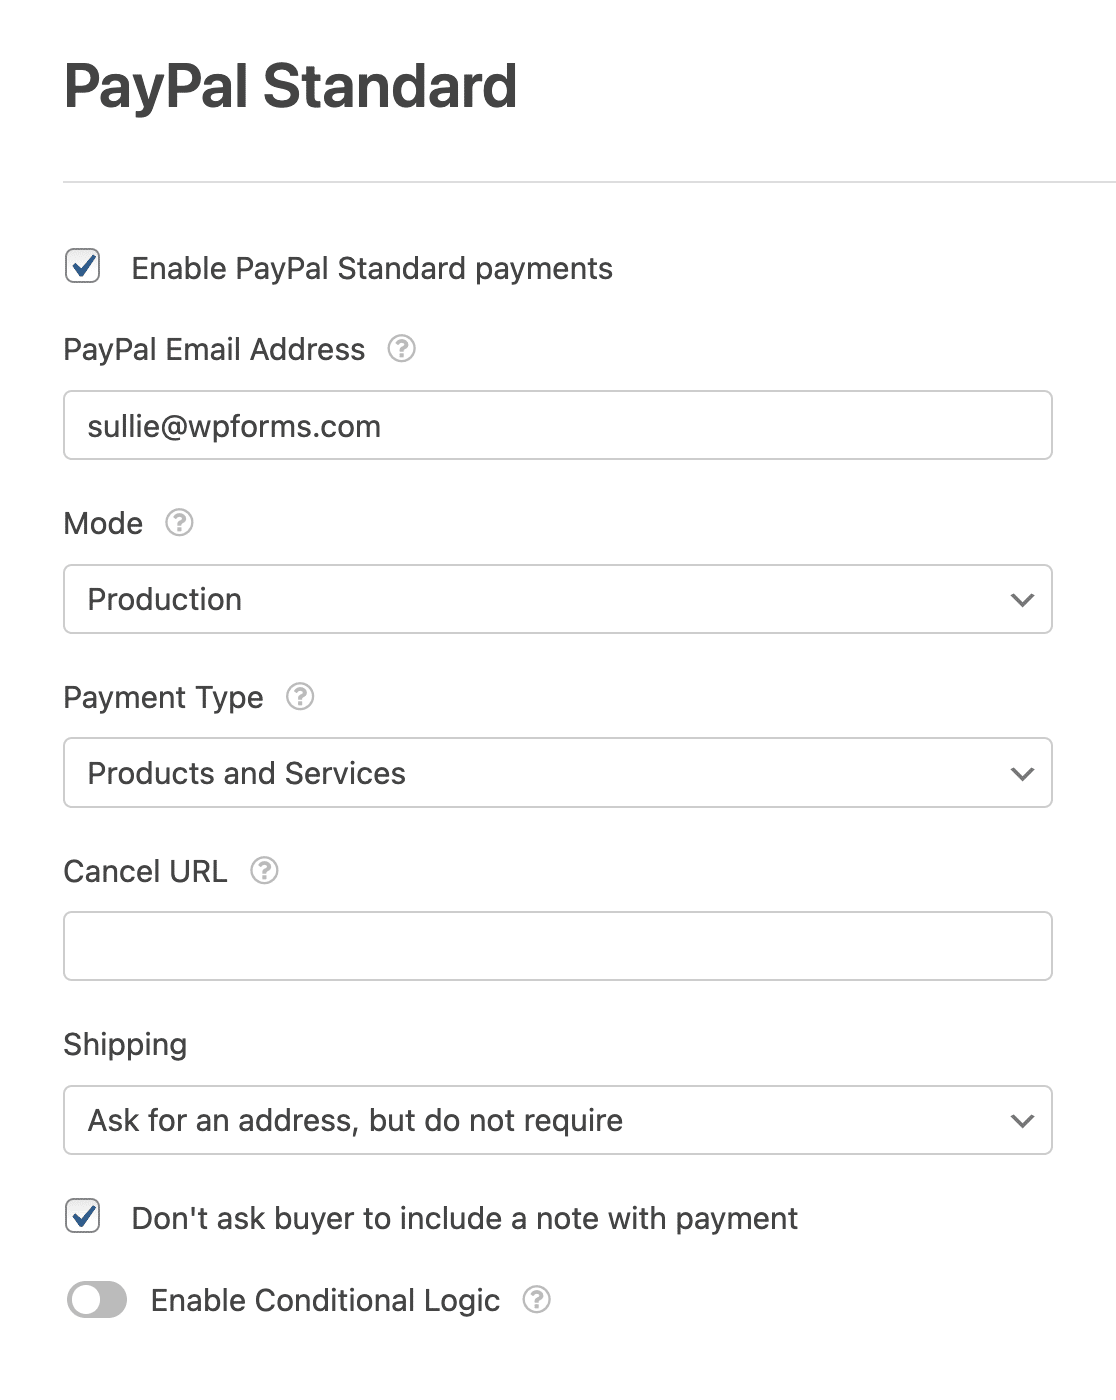 Configuring the PayPal Standard settings